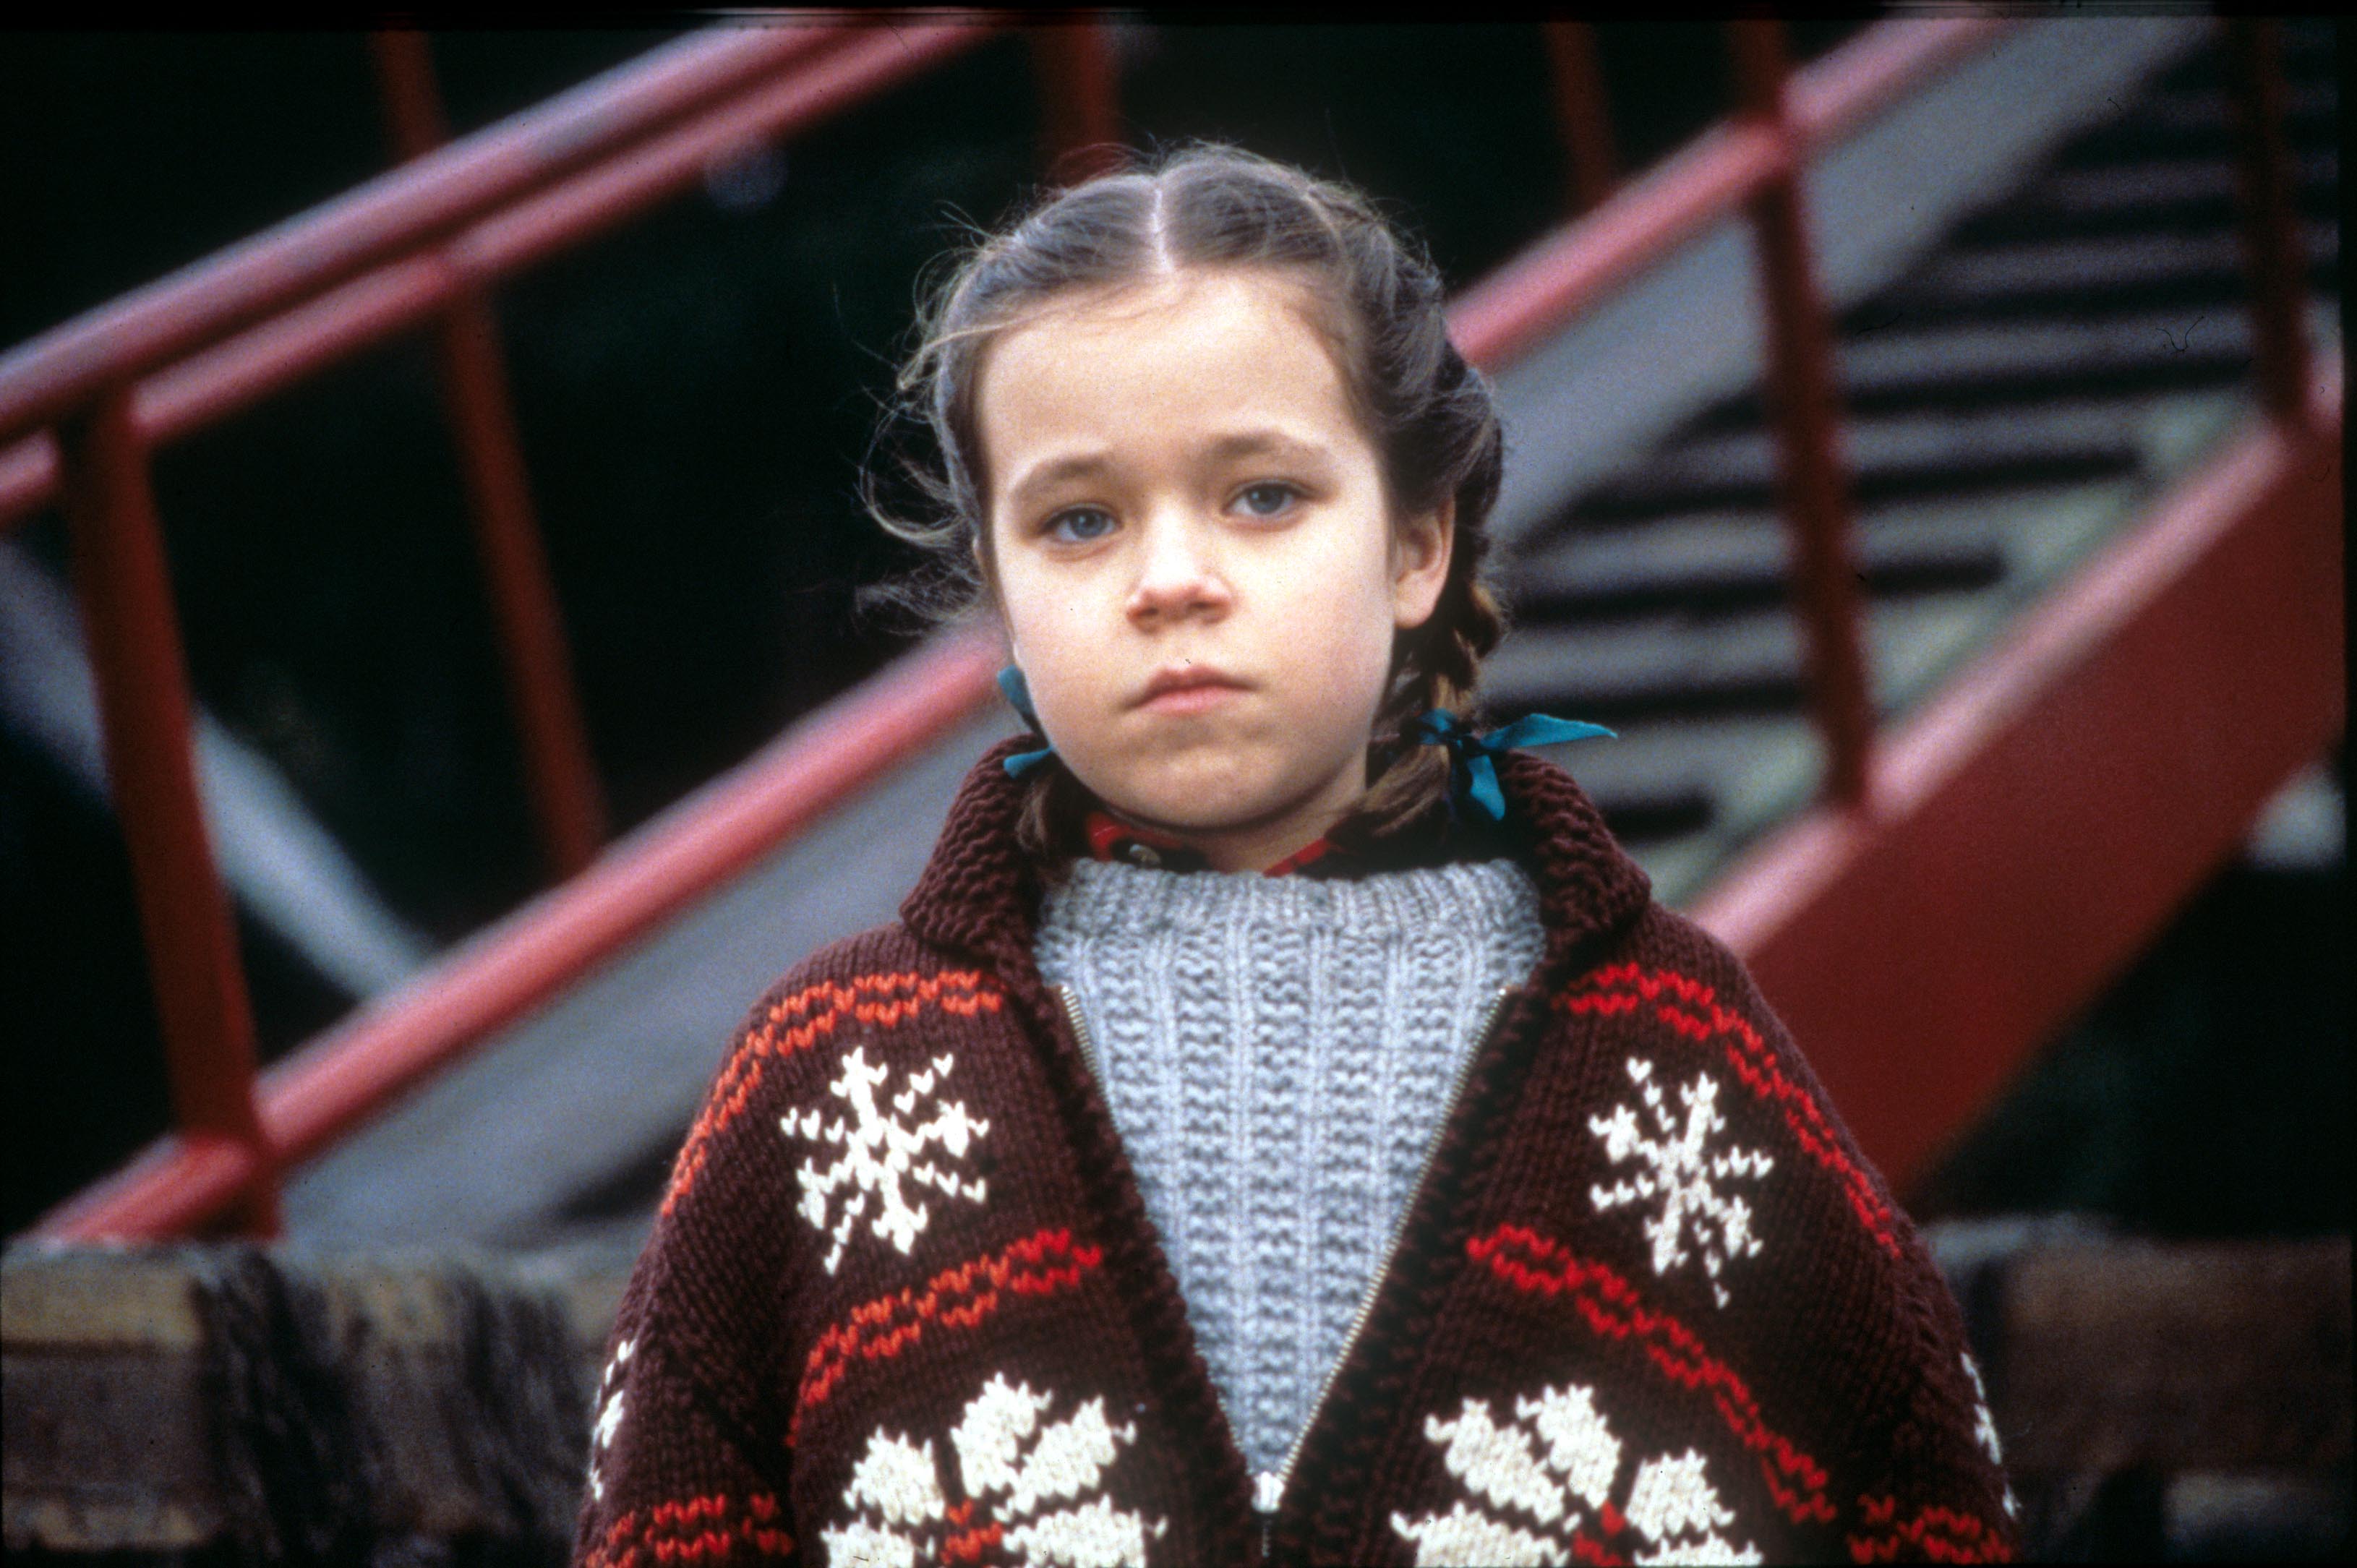 <p>Tina Majorino was one of the most sought-after young actresses of the mid-'90s. She got her first big role at 7 playing Sophie Wilder on the short-lived sitcom "Camp Wilder." Things picked up from there, with film roles in "When a Man Loves a Woman," "Corrina, Corrina," "Andre" and "Waterworld." A number of TV movies followed, including "Before Women Had Wings" with Oprah Winfrey.</p>